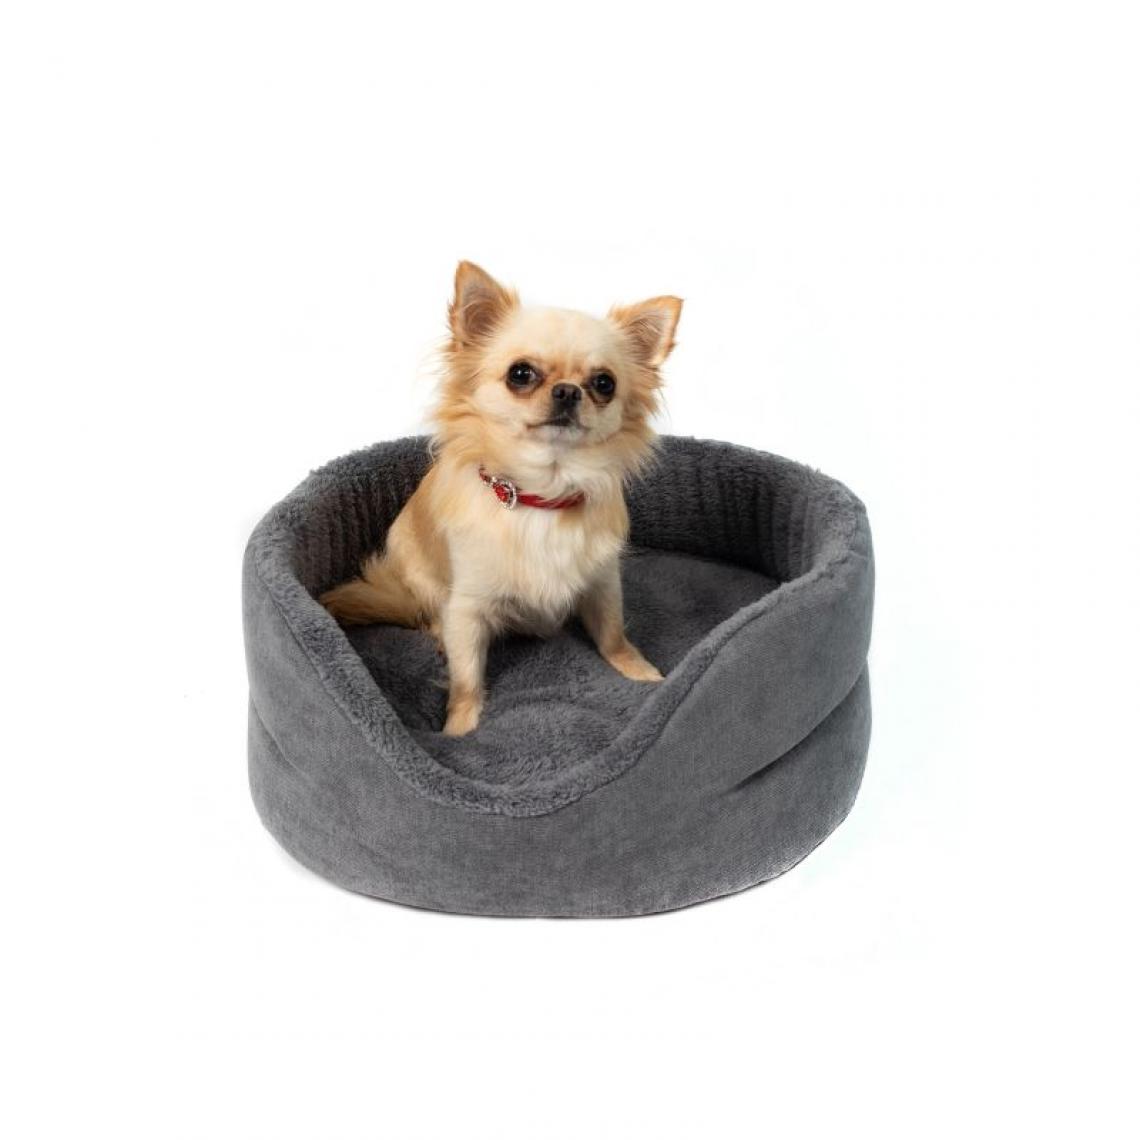 Wiko - Yohanka with a pillow dog bed - gray 4 - Corbeille pour chien